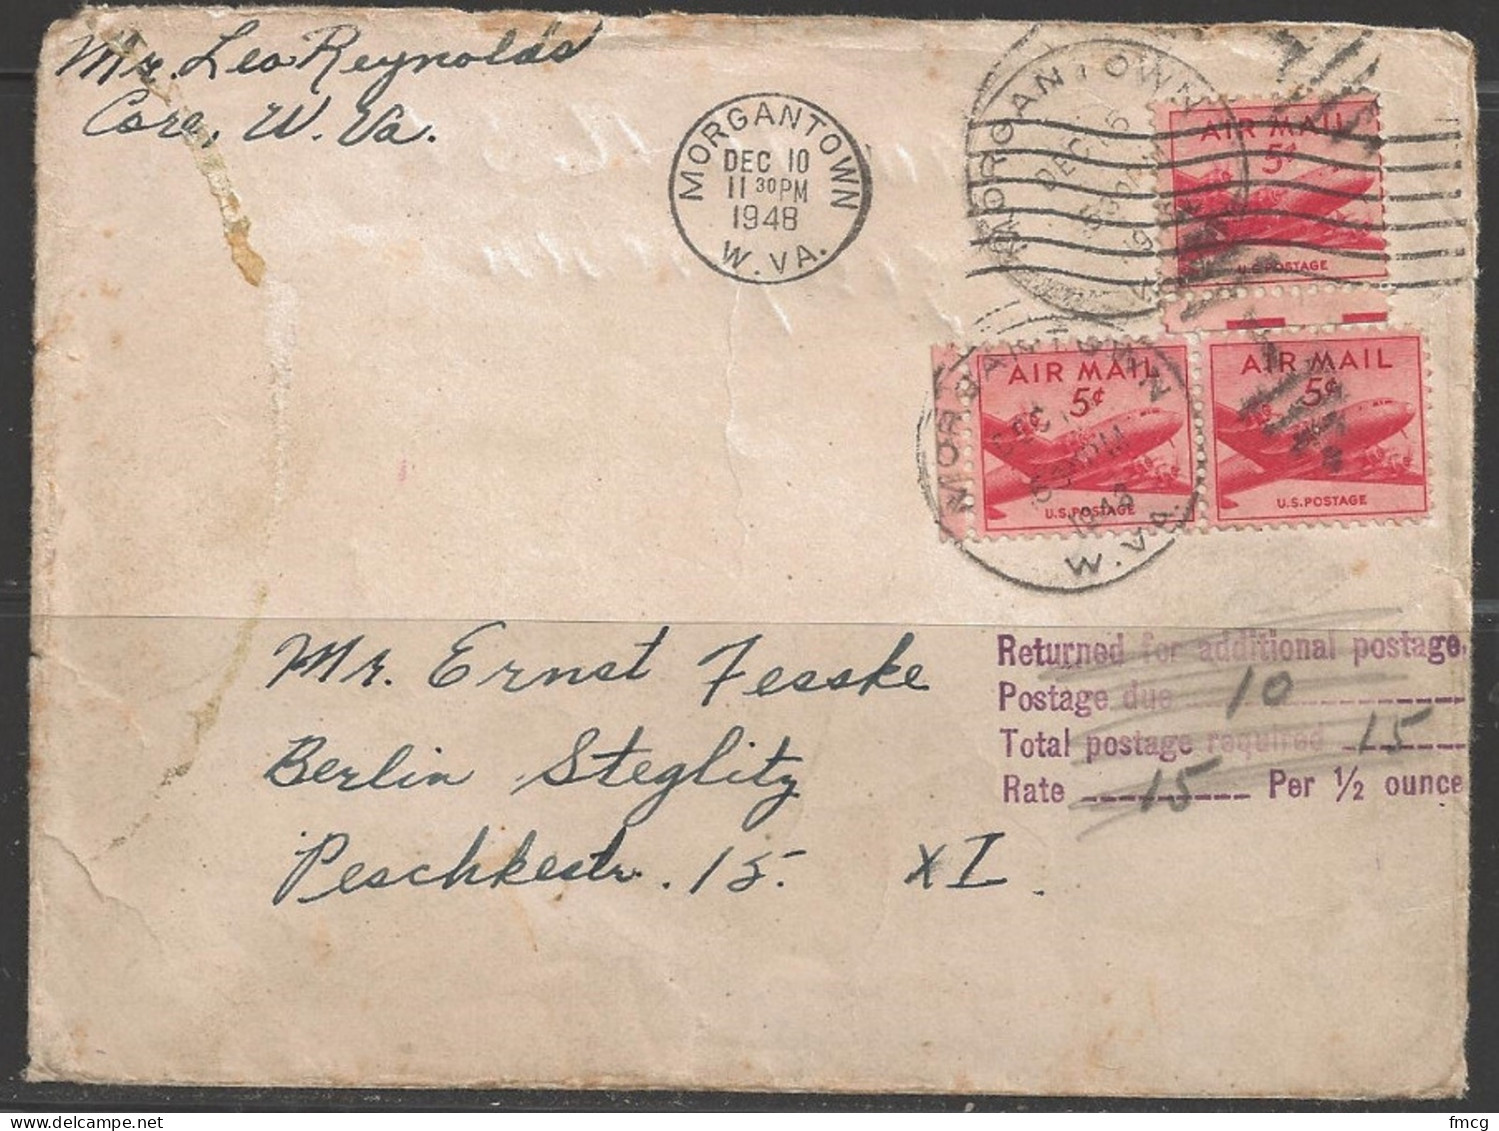 1949 5 Cents Airmail, Additional Postage, Morgantown WVA To Berlin Germany - Covers & Documents